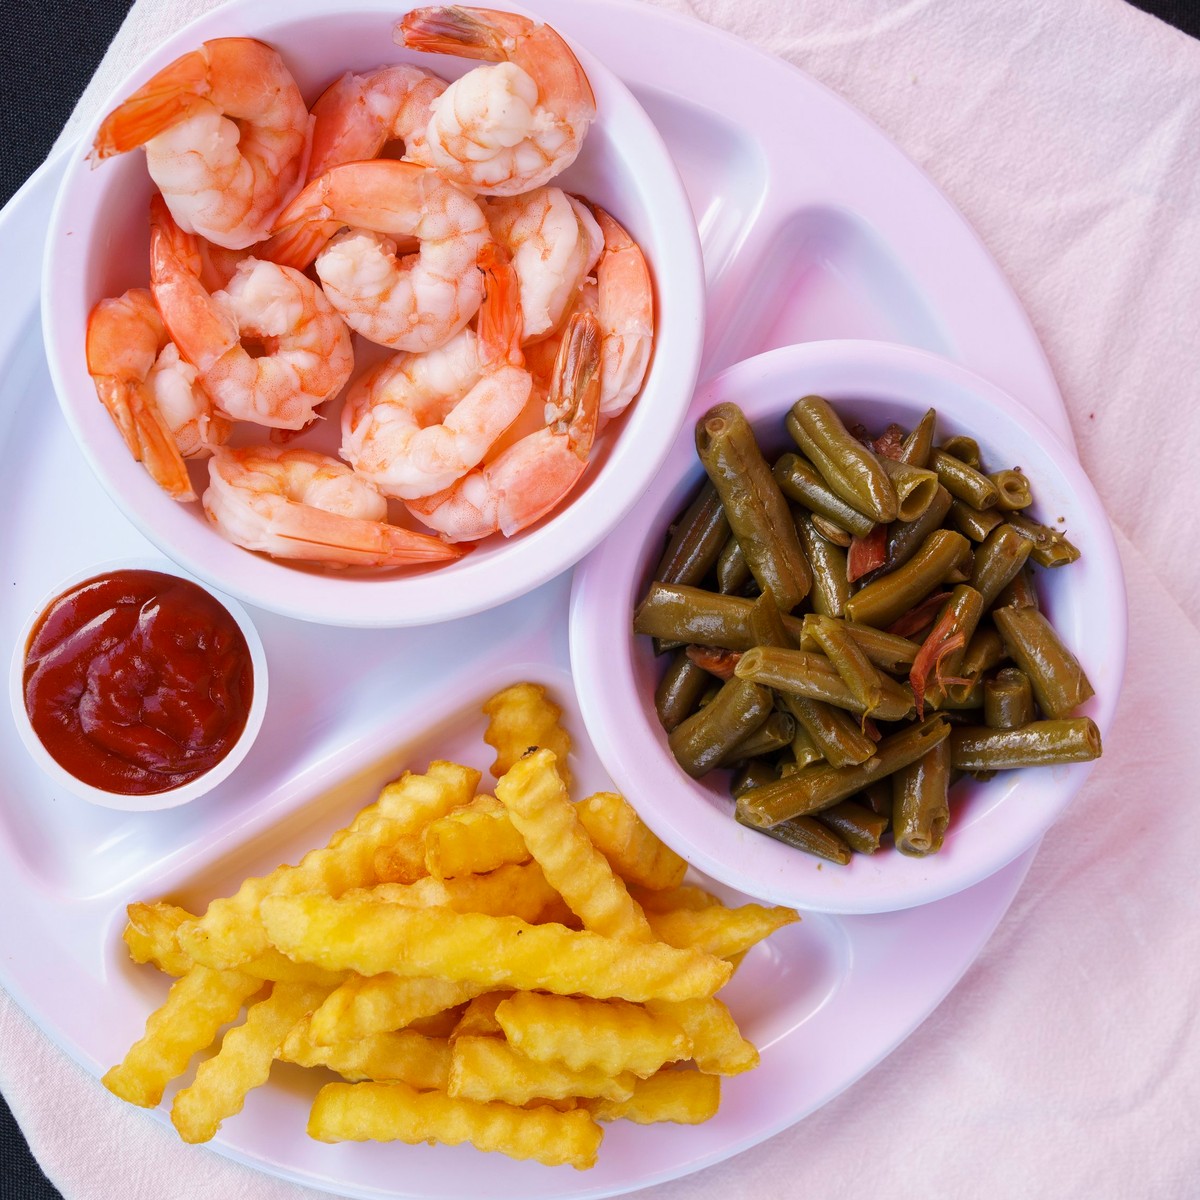 Off The Hook Seafood Restaurant in Rolesville, North Carolina